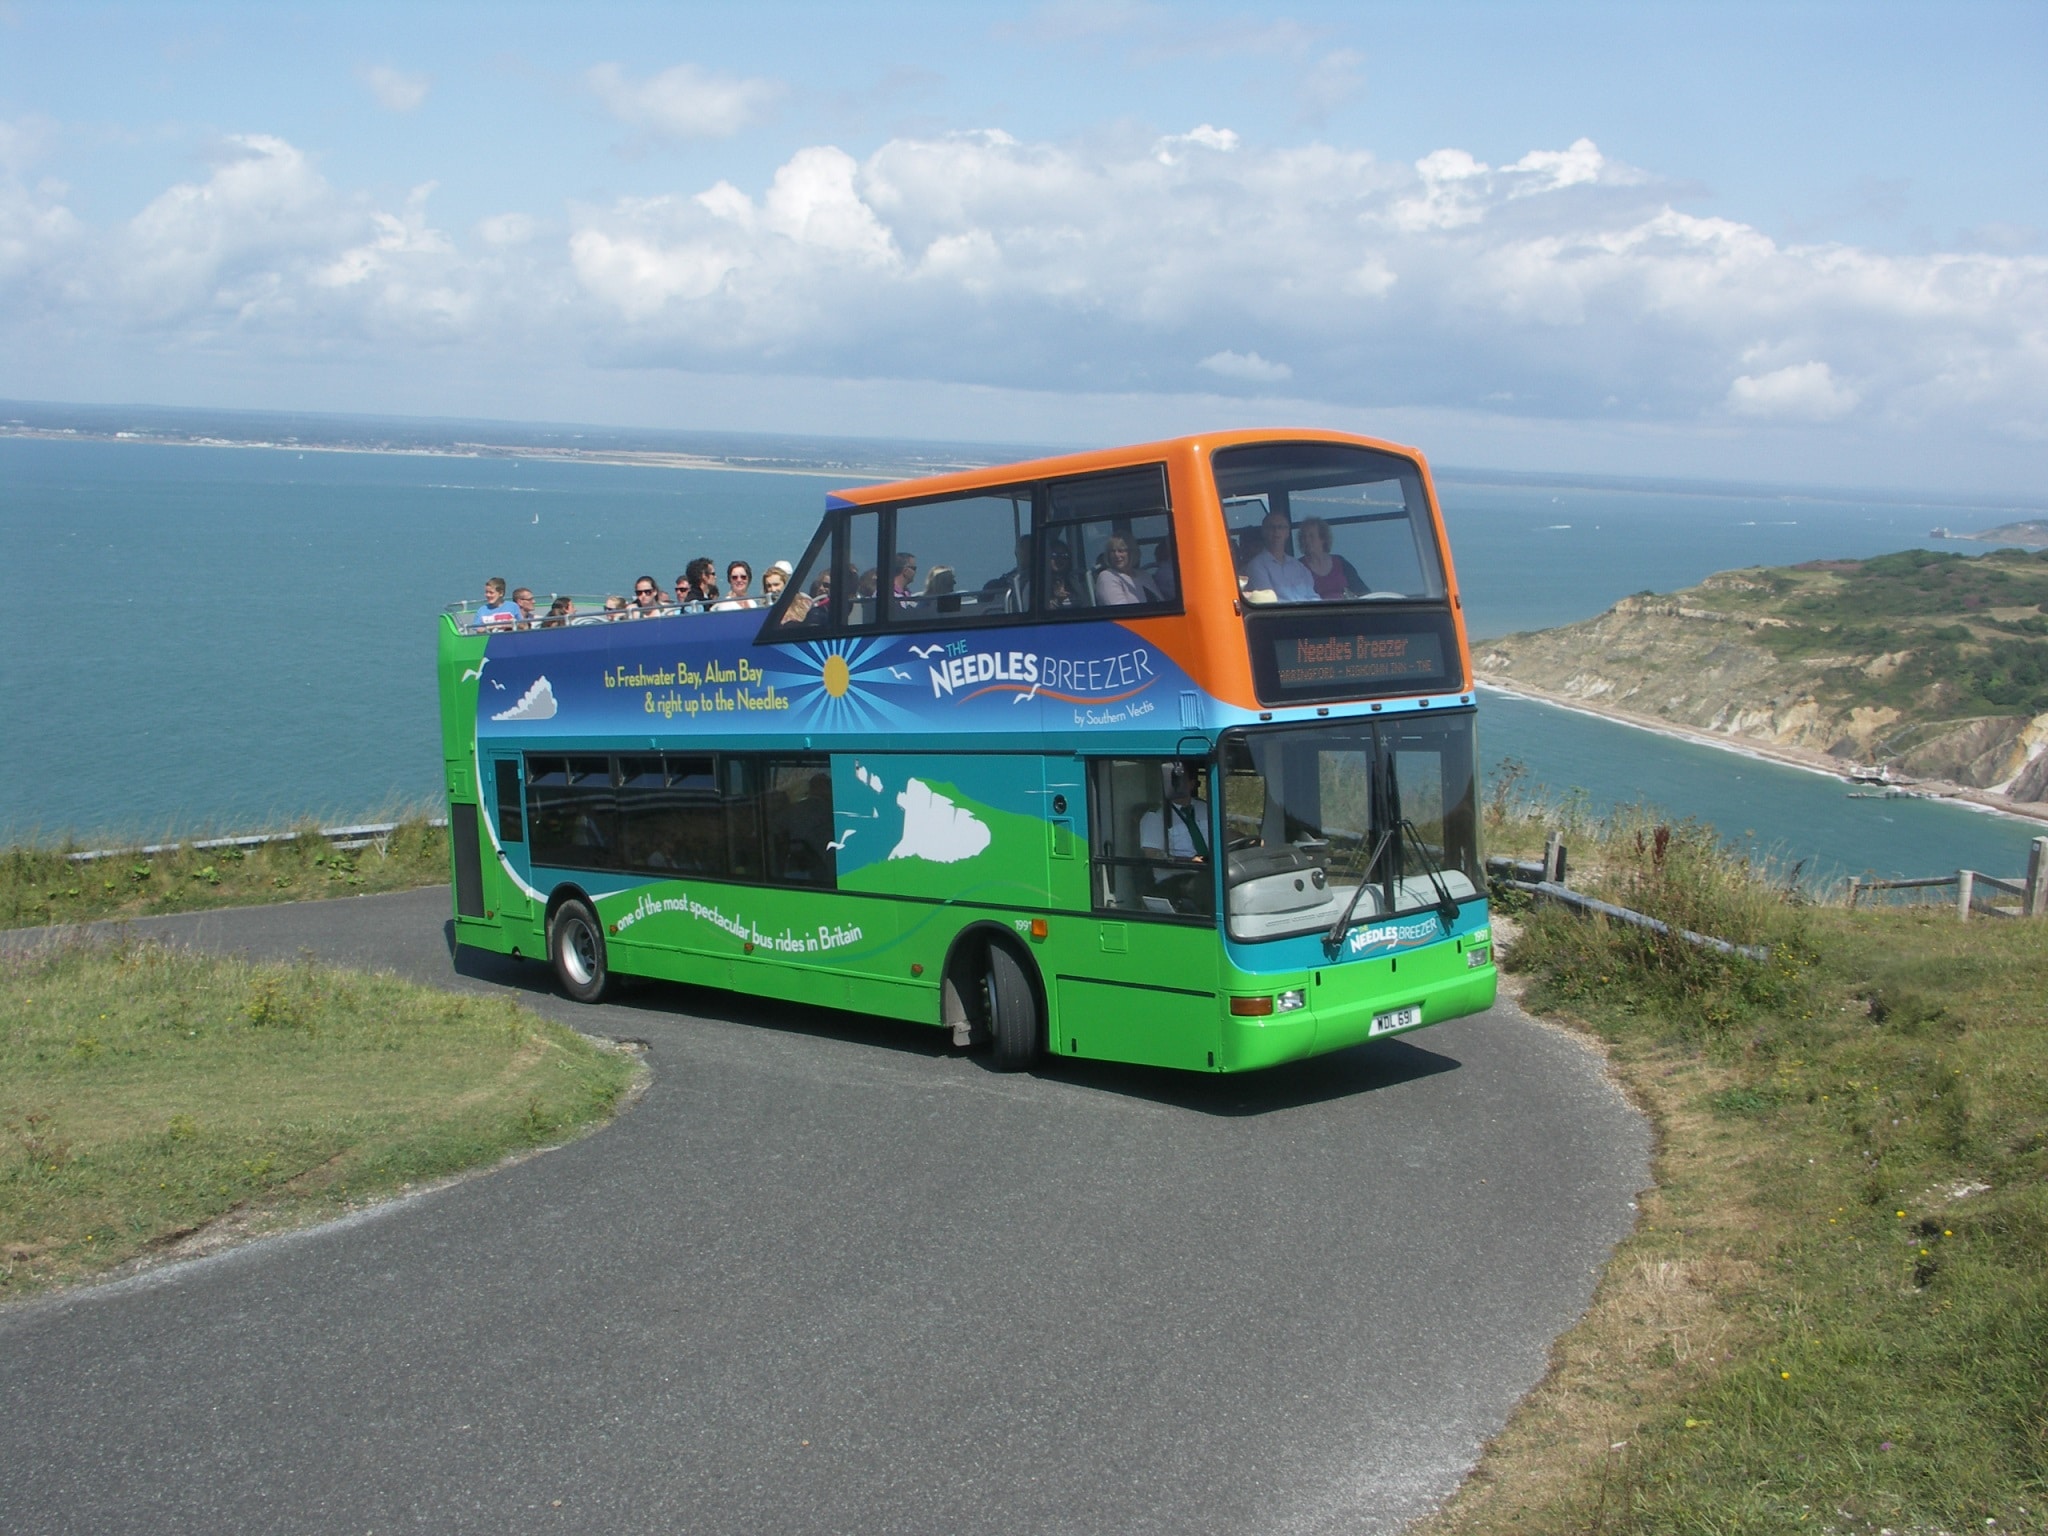 Concessionary travel market is key for bus industry, says Alex Warner